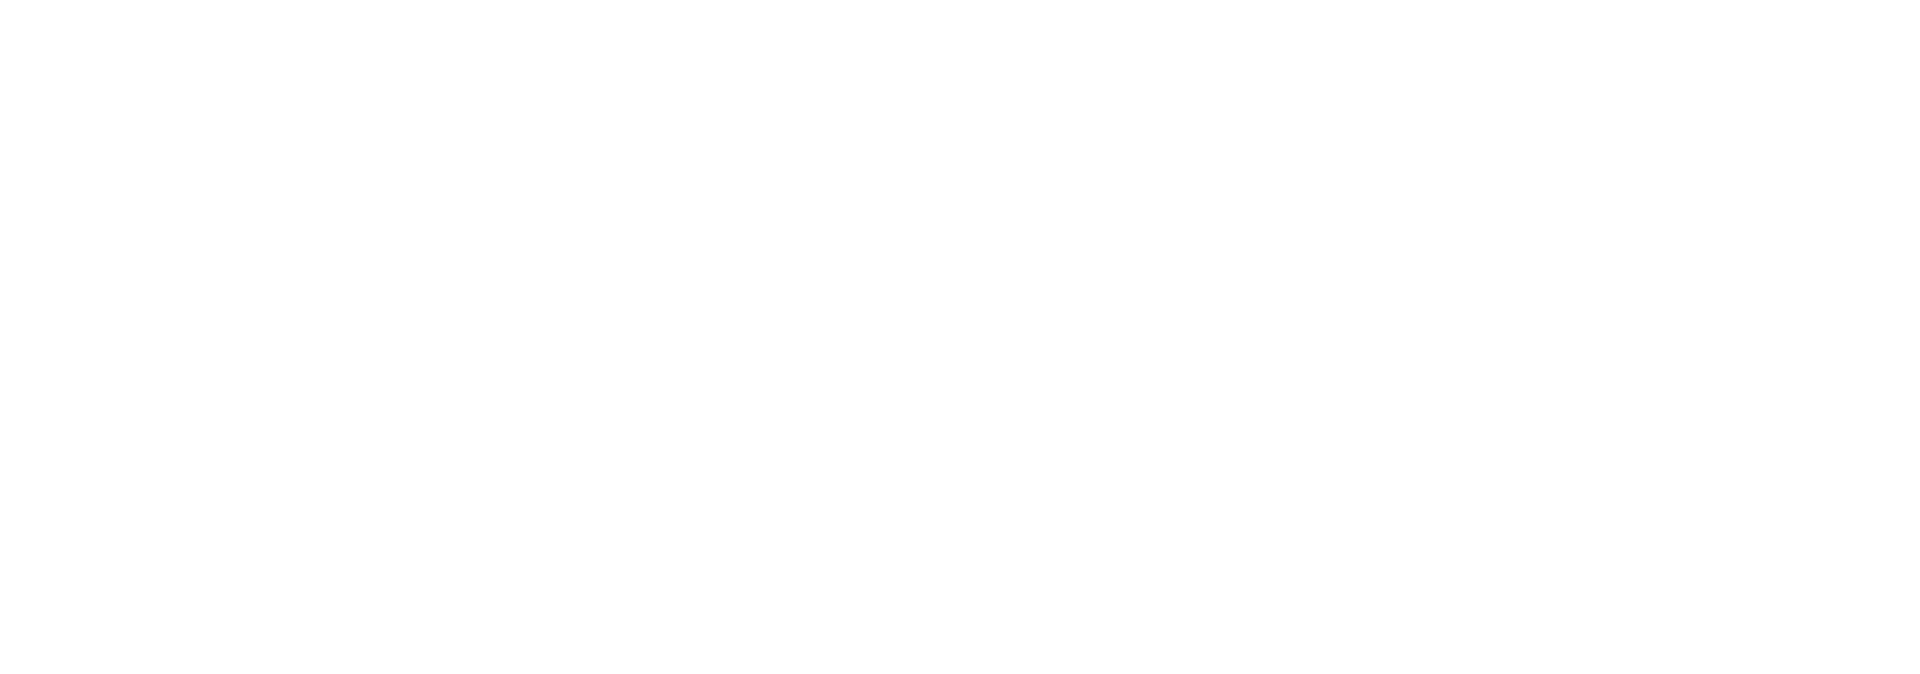 Haccp Food Safety Book